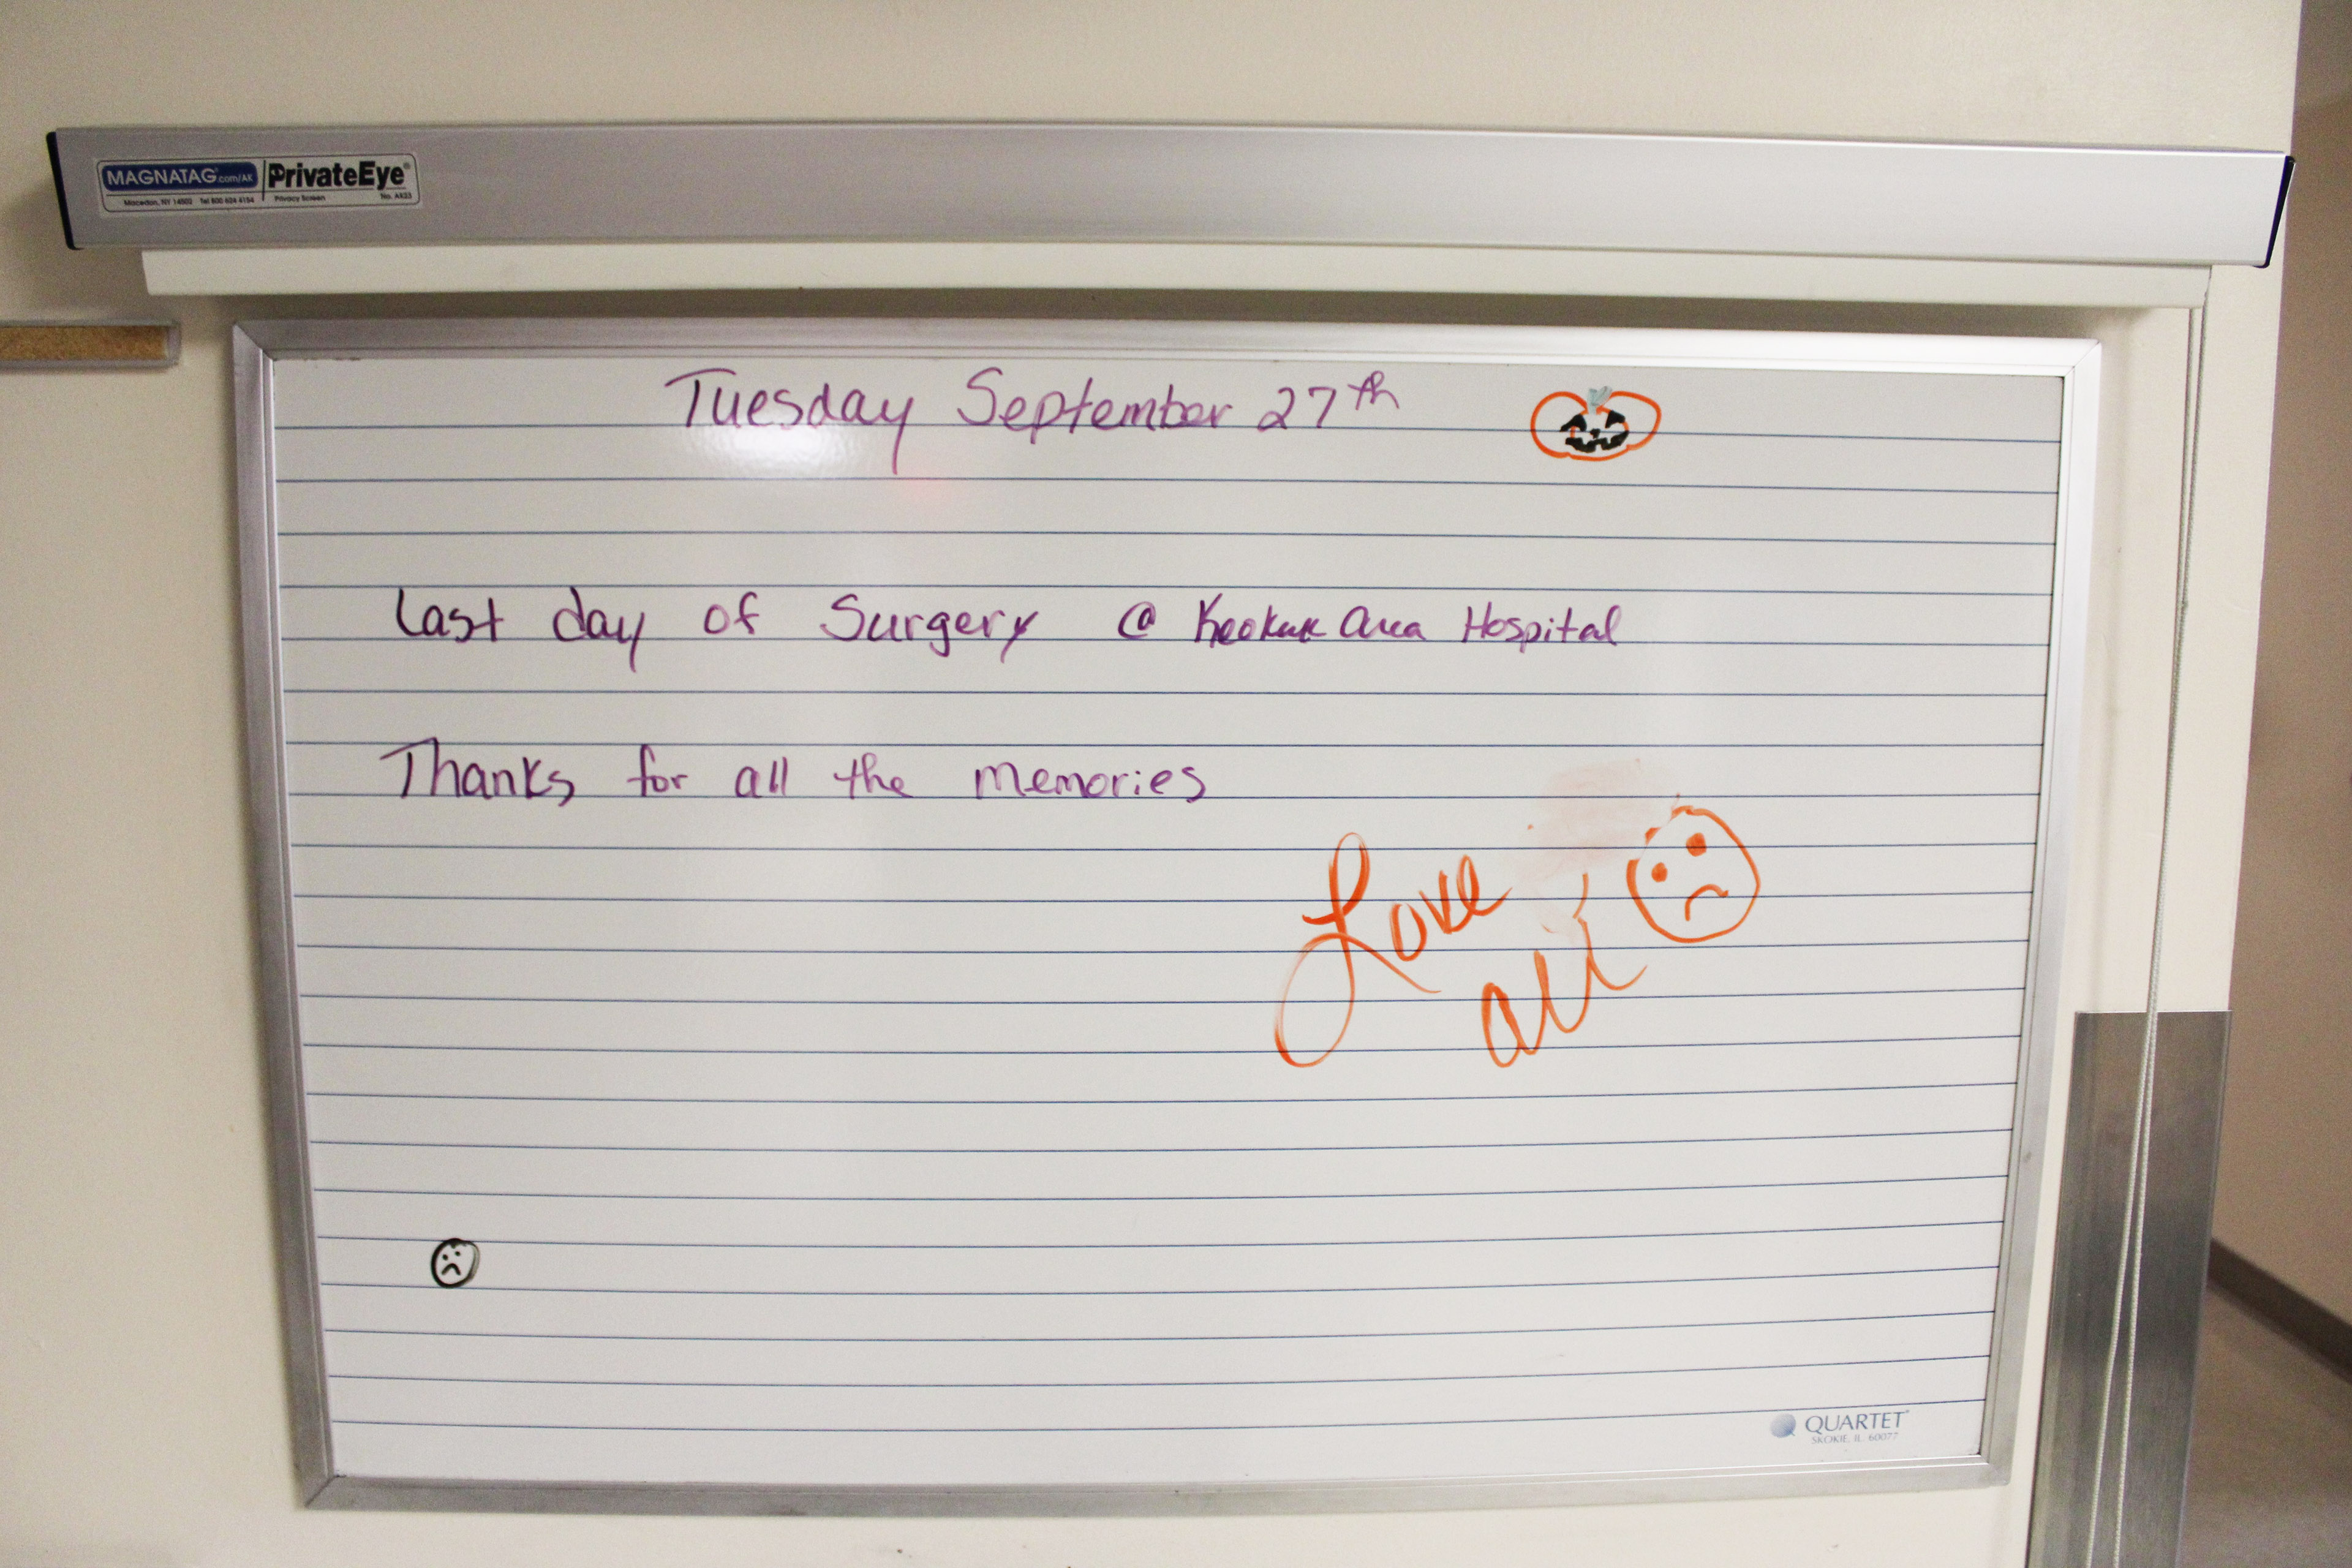 A white board inside the hospital reads, "Tuesday September 27th / Last day of surgery @ Keokuk Area Hospital / Thanks for all the memories / Love, all"